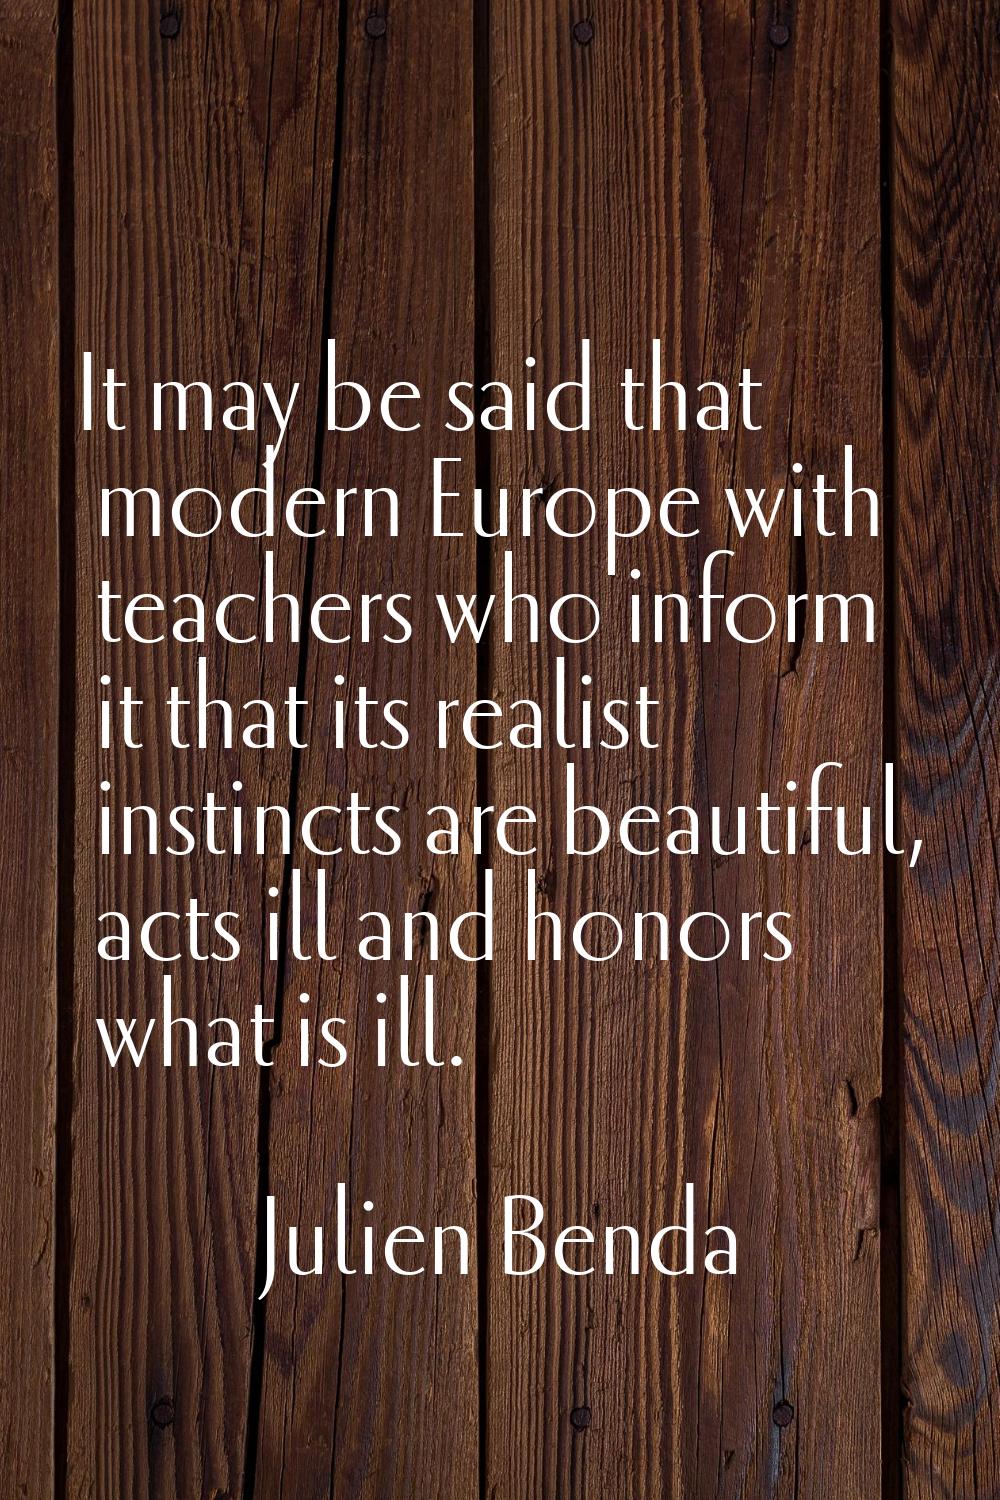 It may be said that modern Europe with teachers who inform it that its realist instincts are beauti